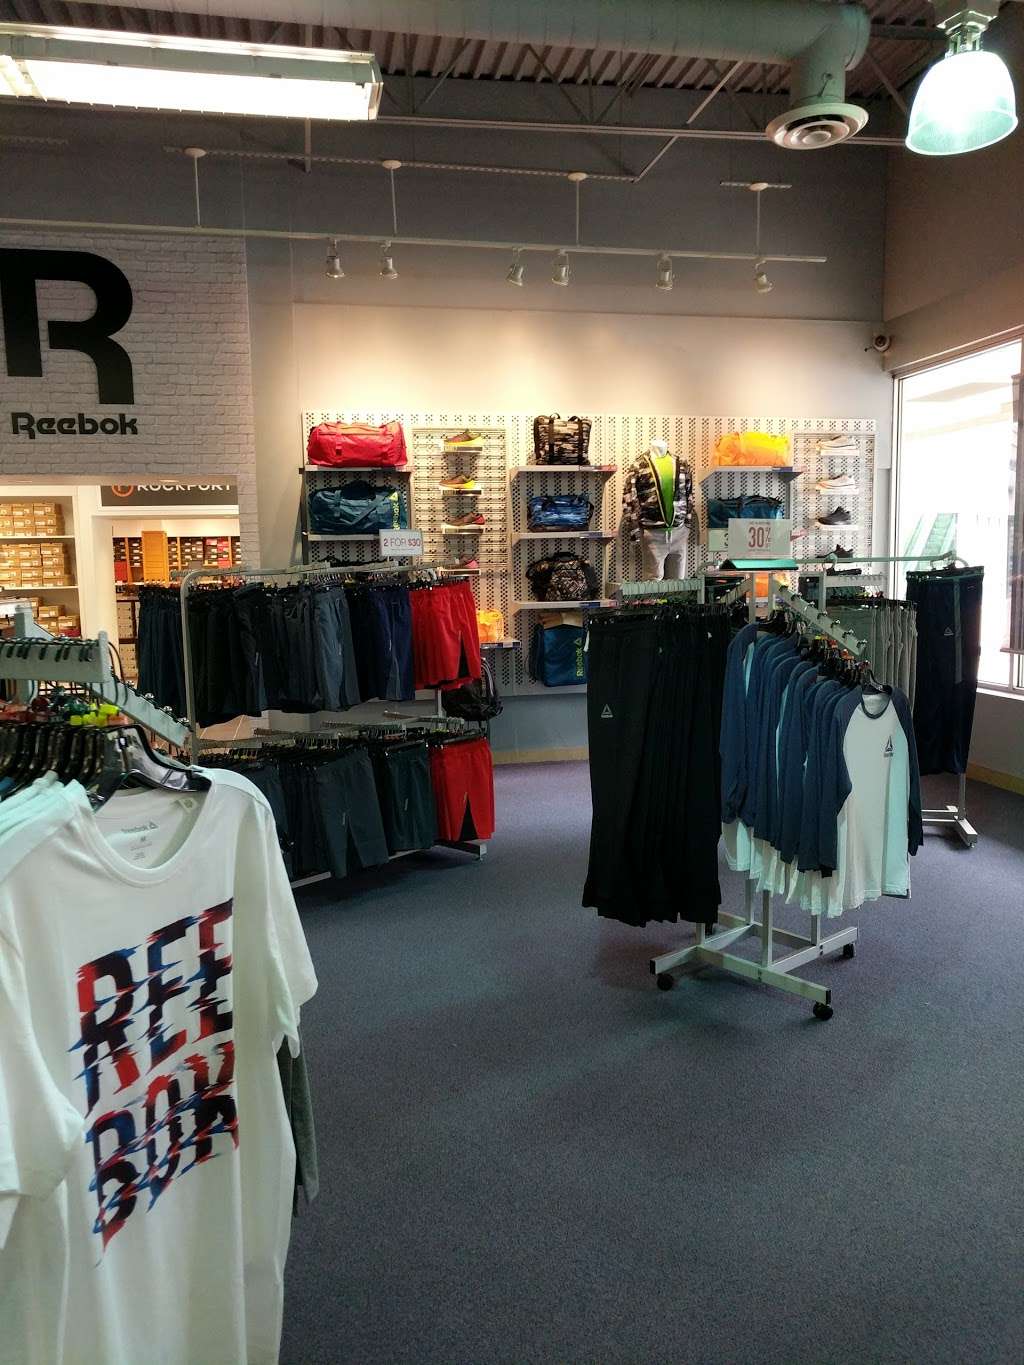 Reebok Outlet, 1000 Premium Outlets Dr, Tannersville, PA USA